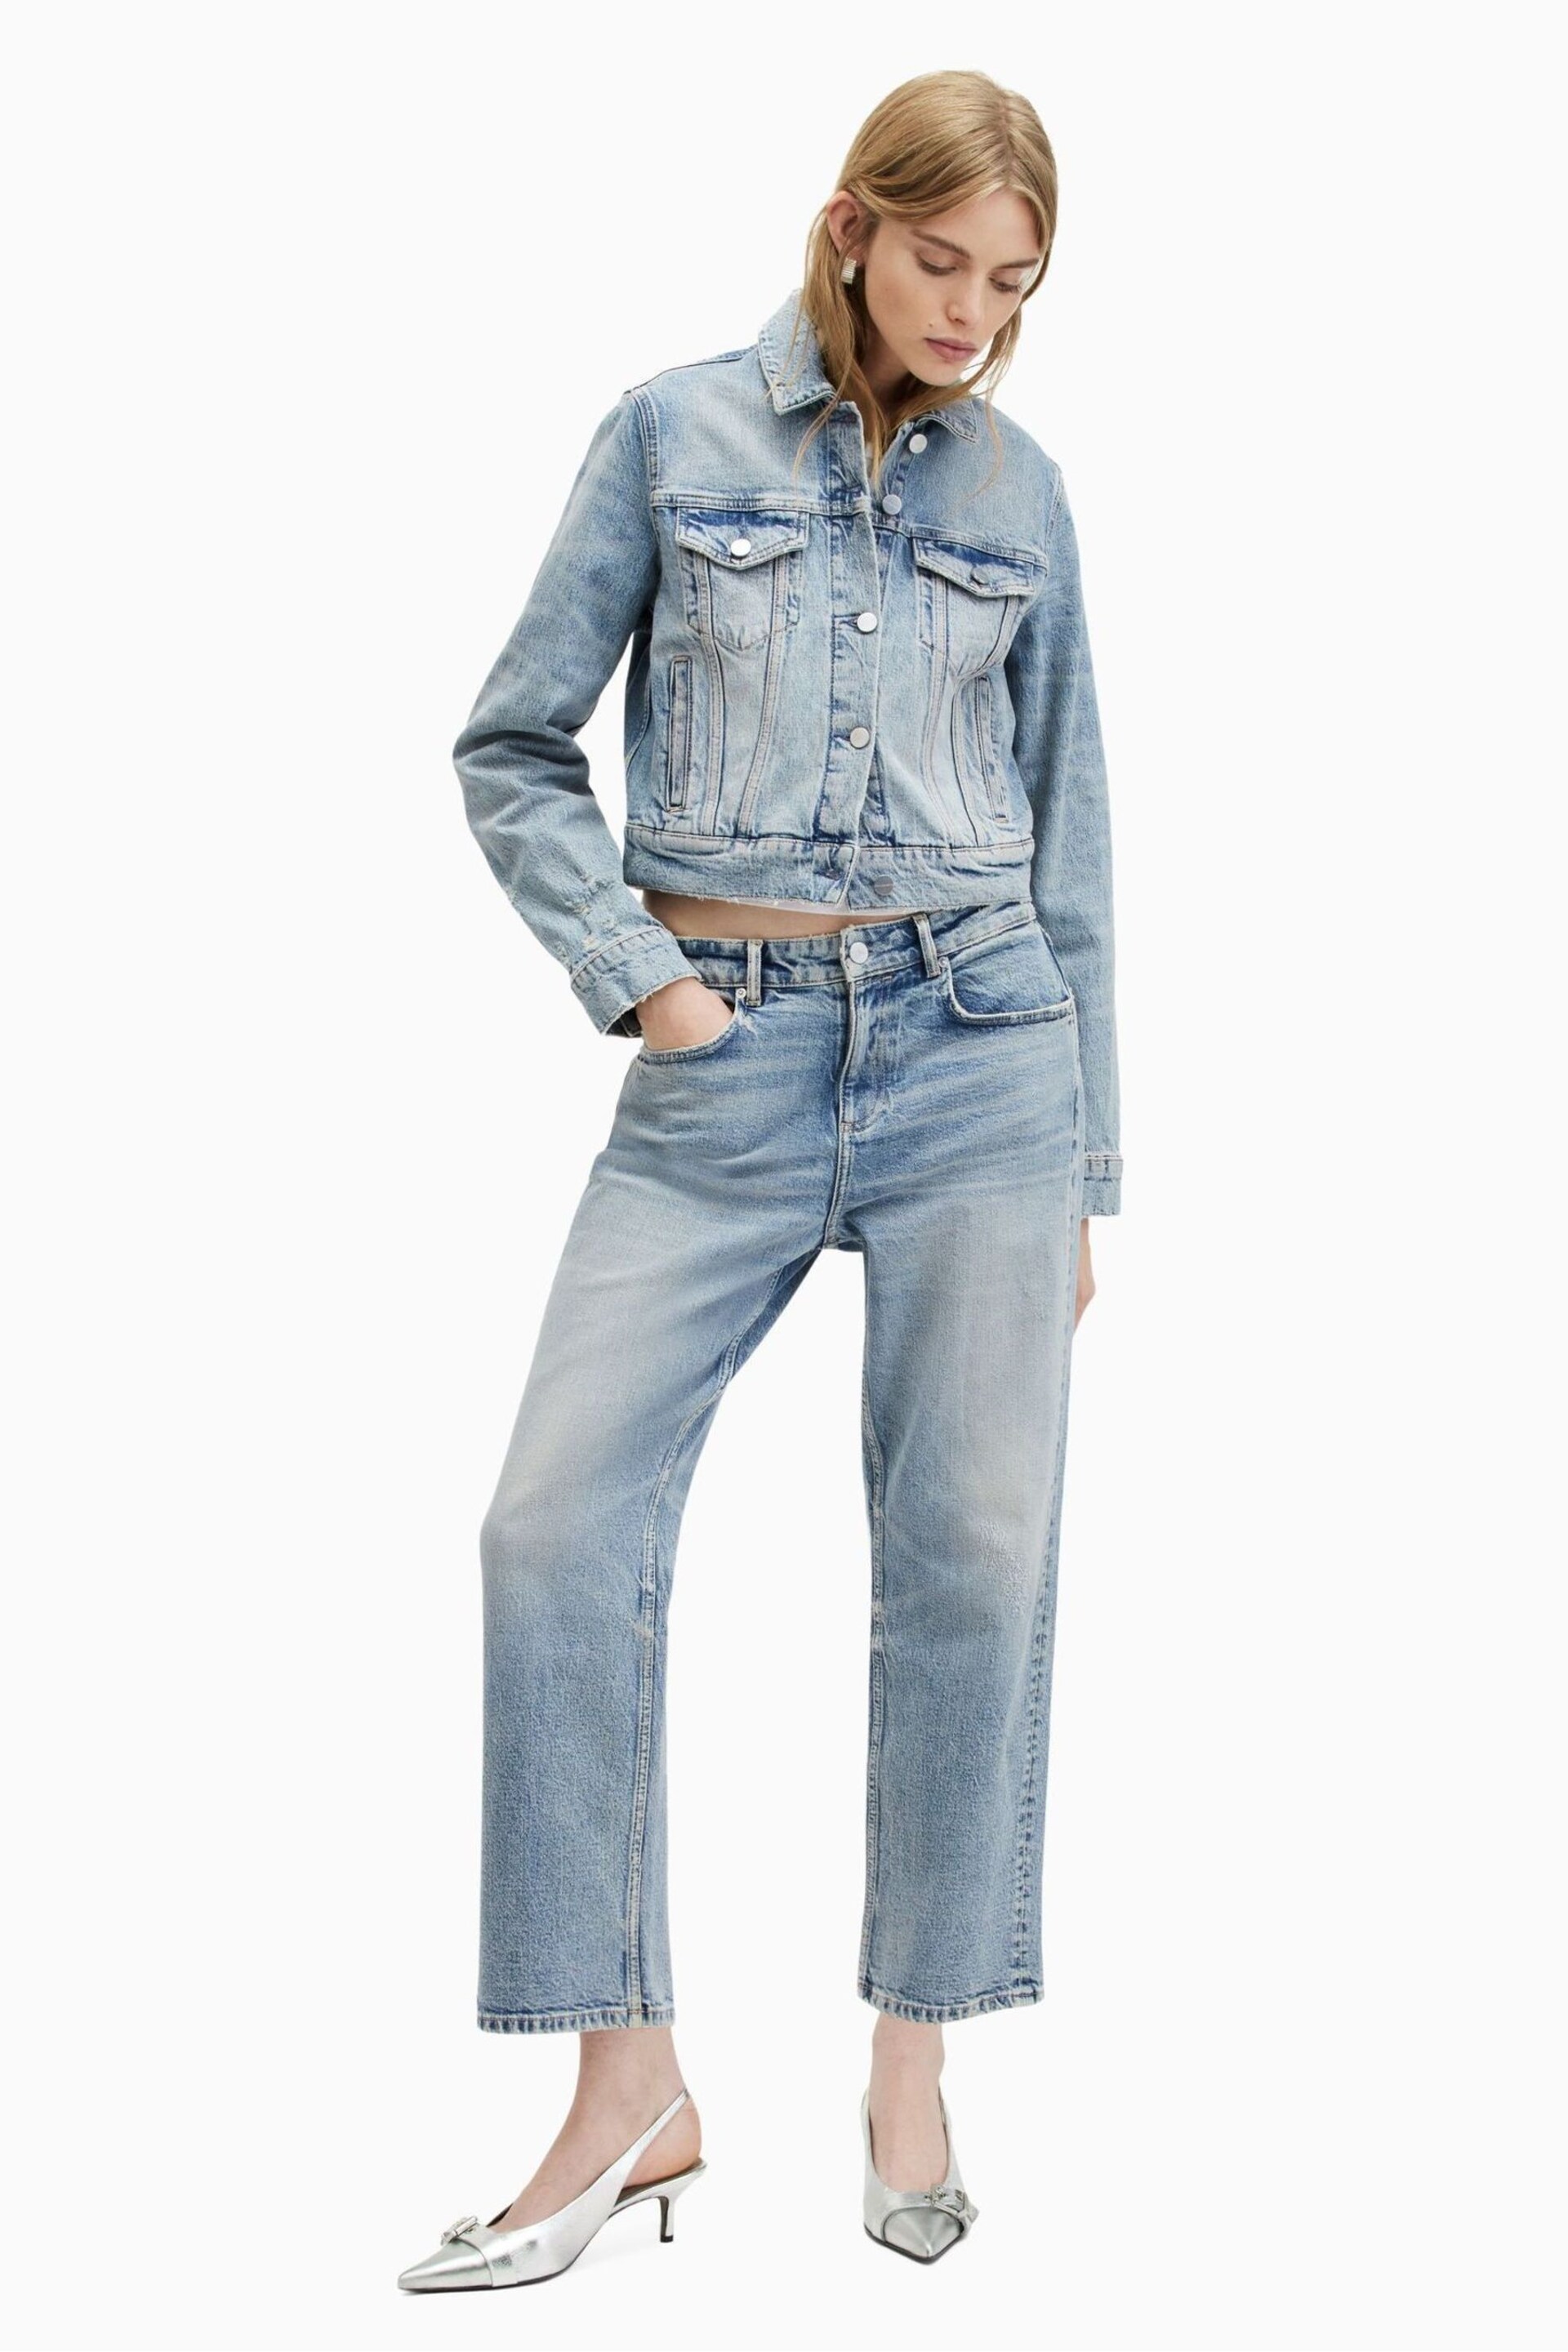 AllSaints Blue Ida Cropped Jeans - Image 4 of 7